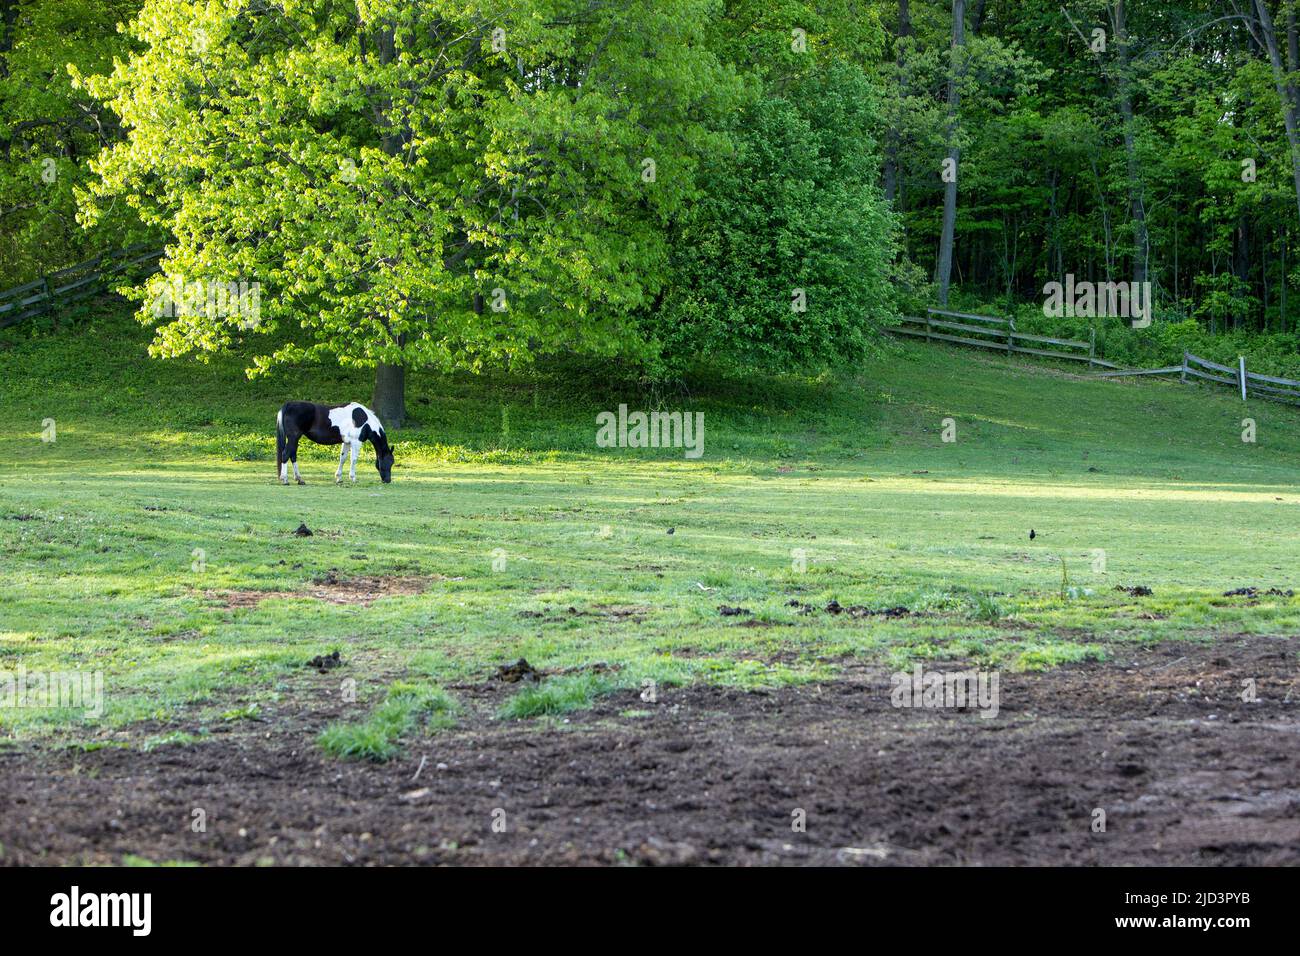 One horse alone in a pasture. Stock Photo